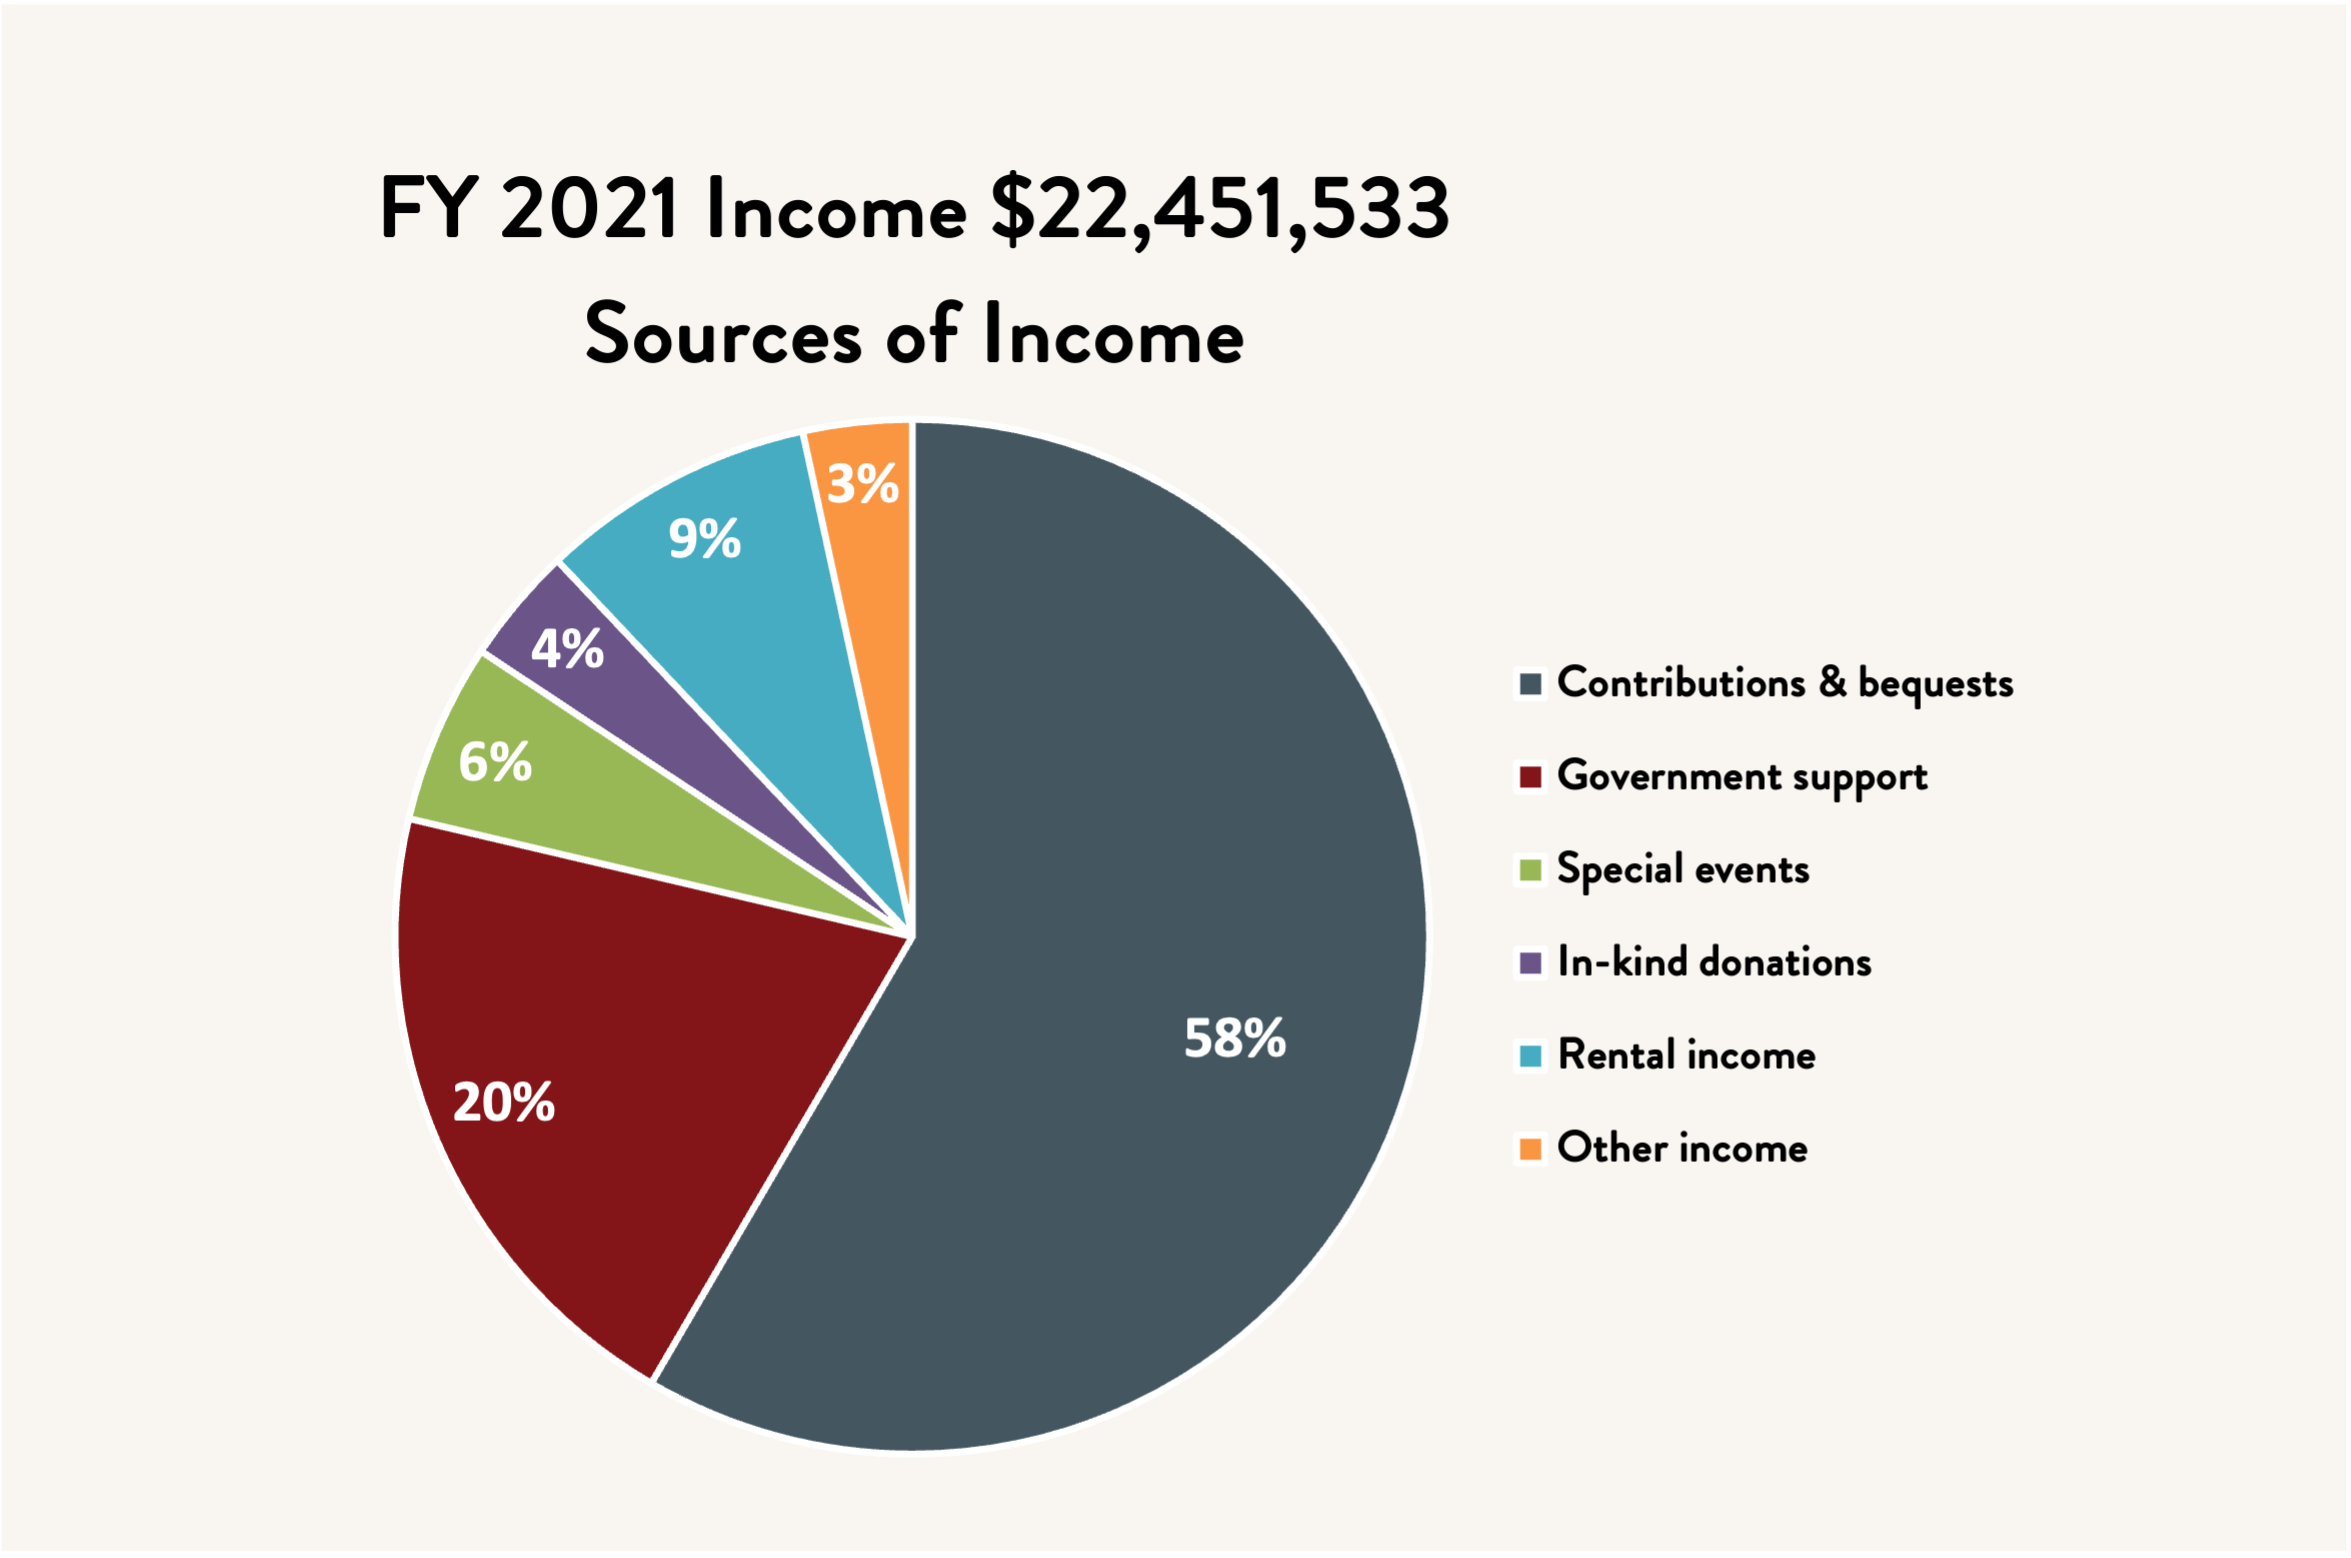 Chart titled "FY 2021 Income $22,451,533 Sources of Income." The chart shows 58% Contributions & bequests, 20% Government support, 6% Special events, 4% In-kind donations, 9% Rental income, and 3% Other income.